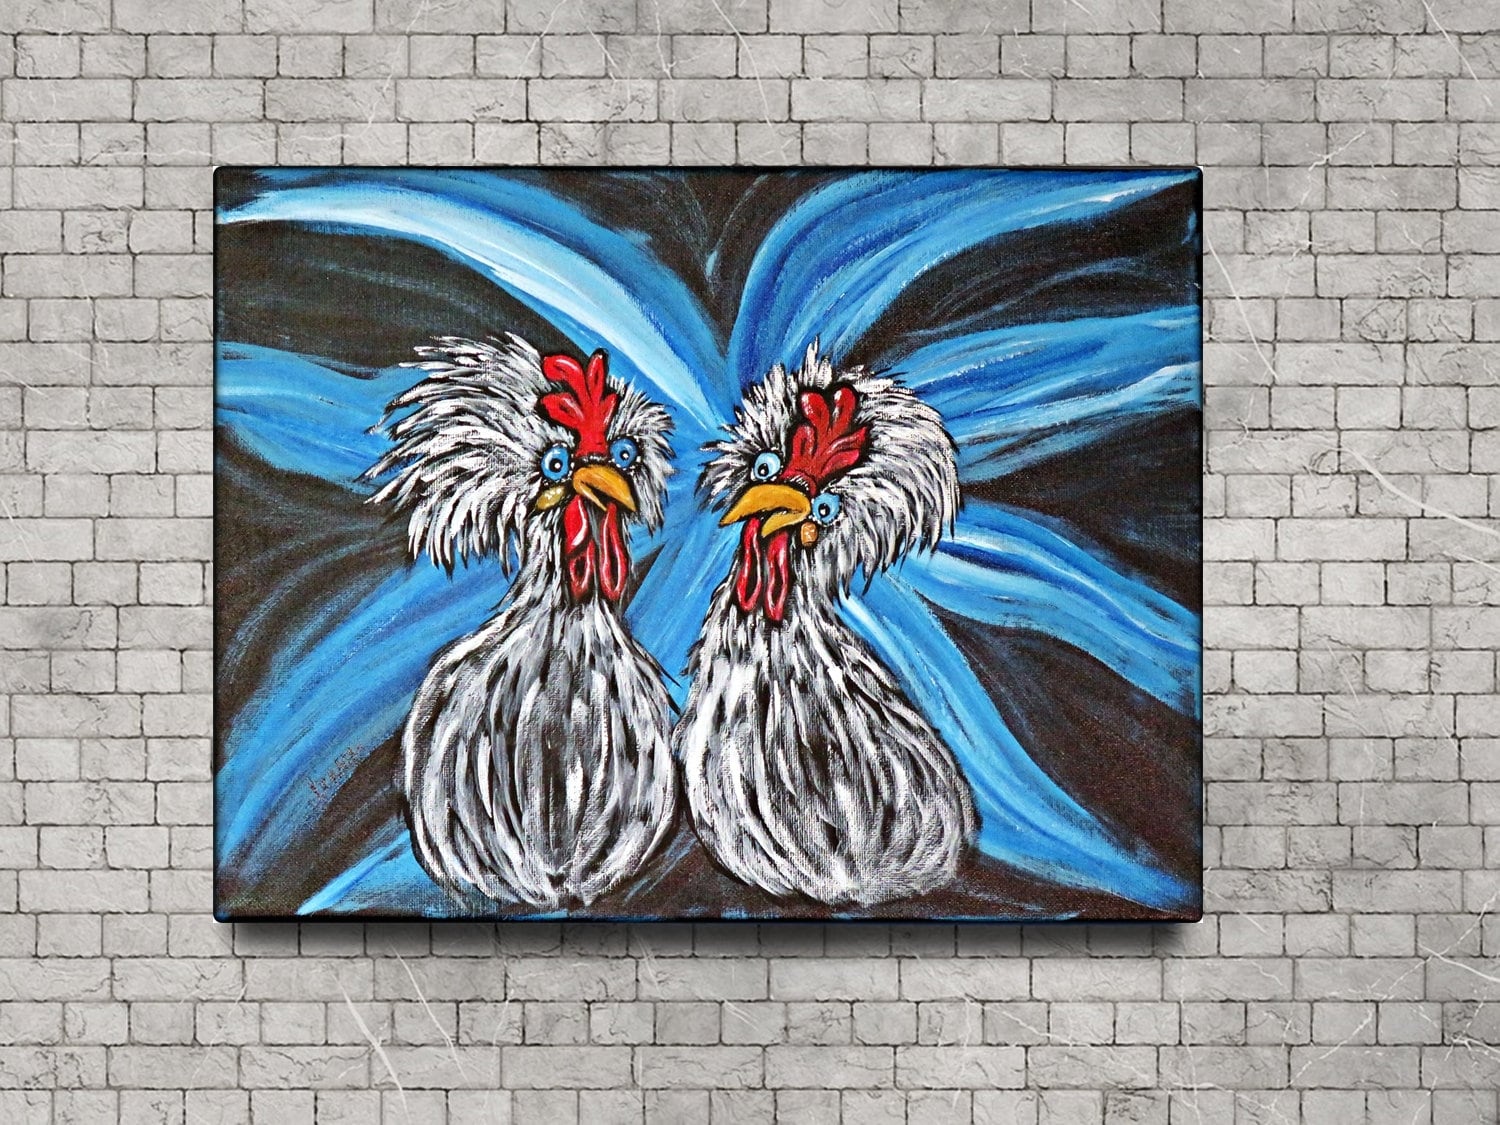 Chicken Wall Art / Original Acrylic Painting on Canvas / Whimsical